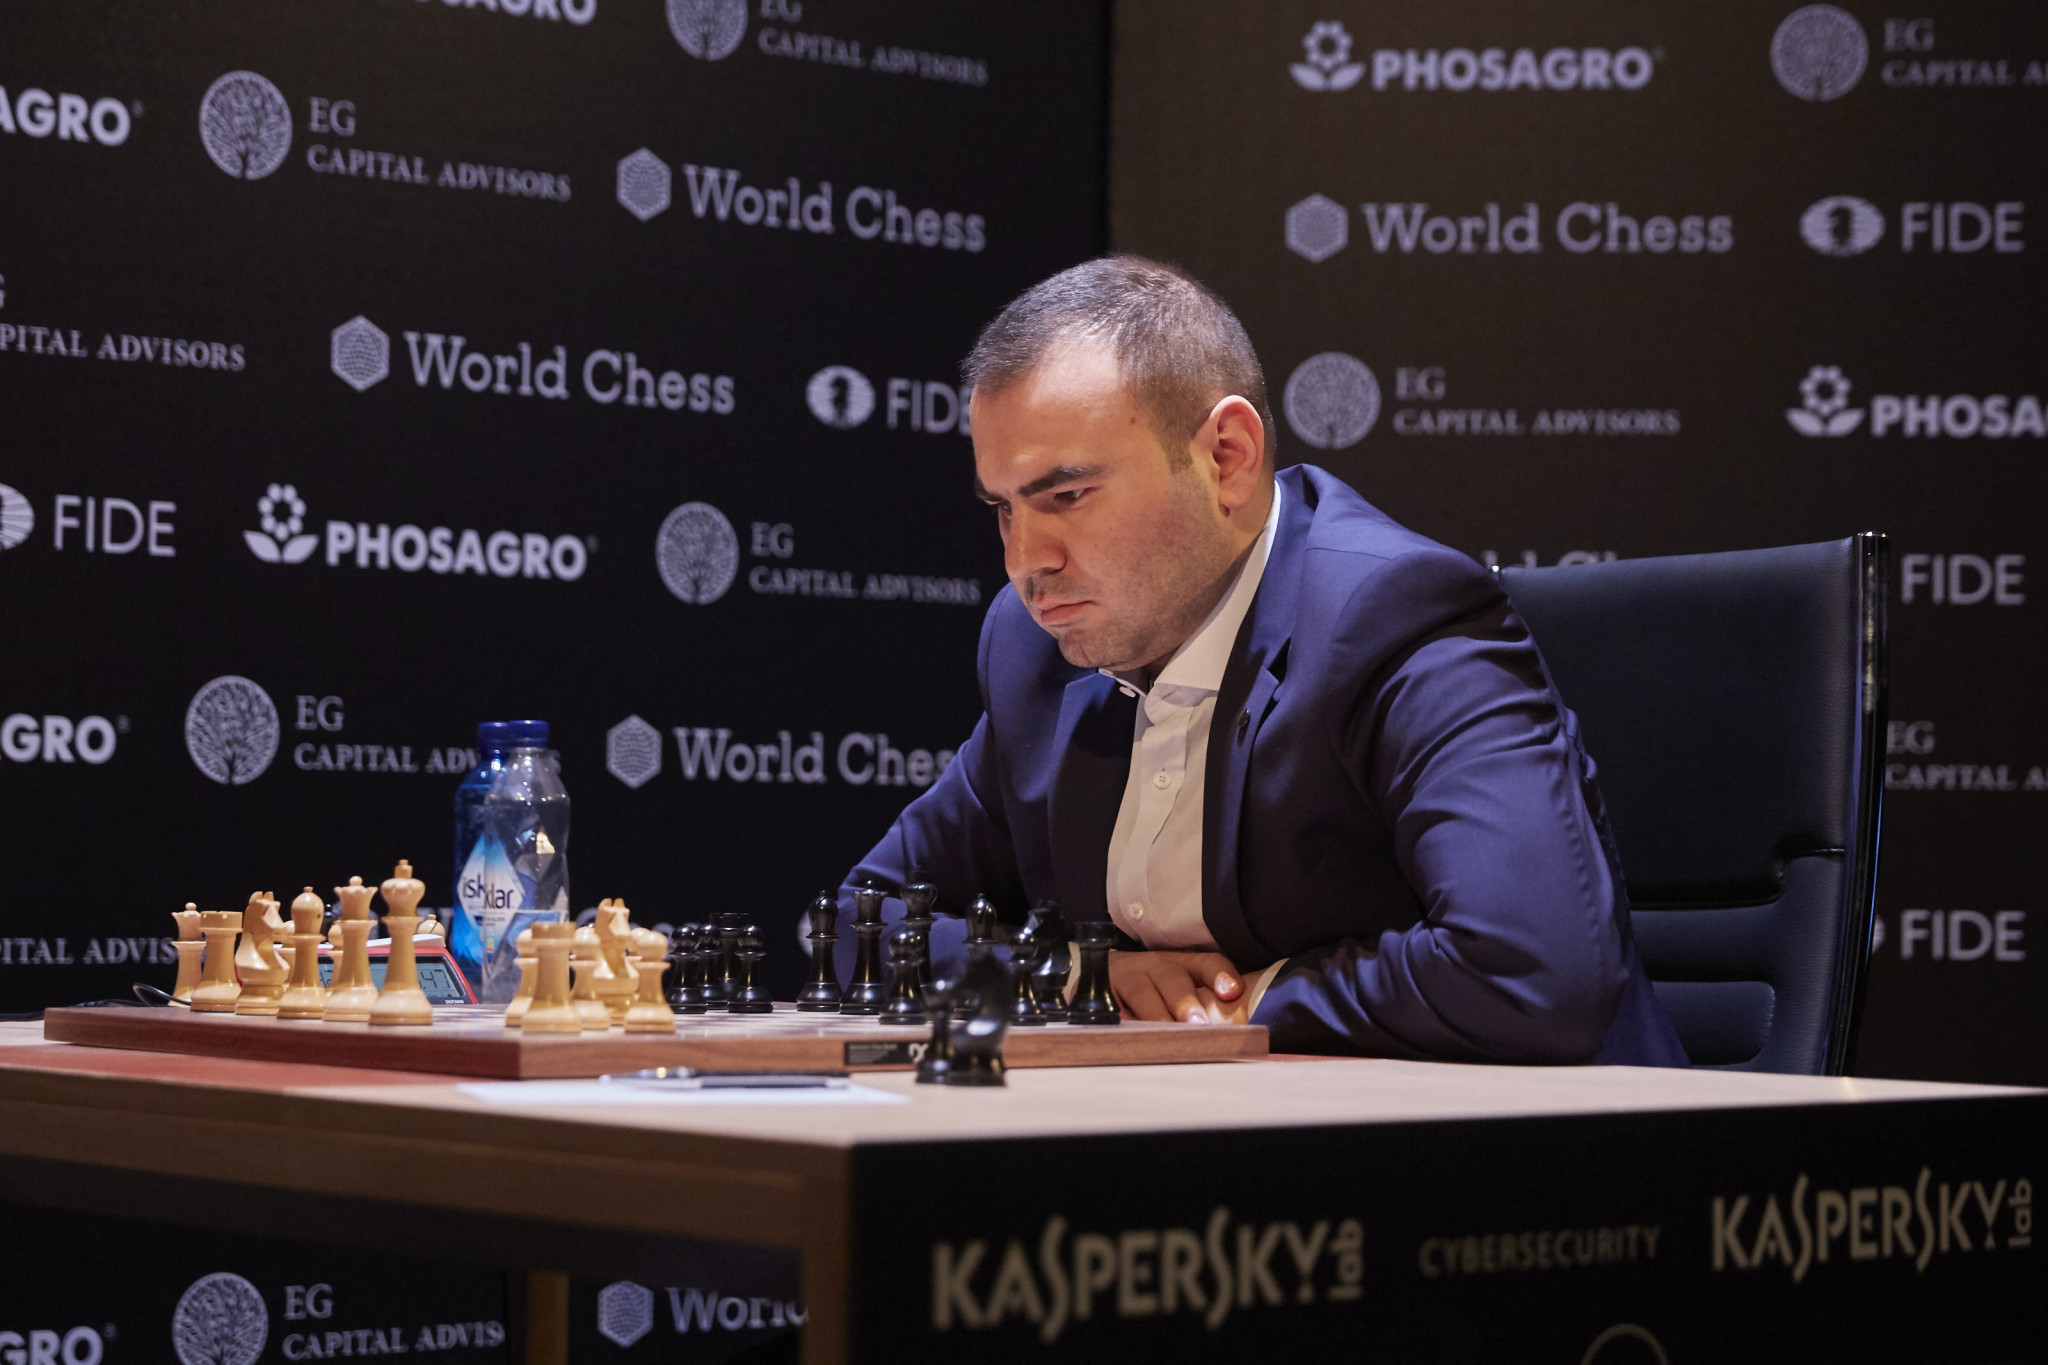 Azerbaijan's Shakhriyar Mamedyarov finished in second place ©Getty Images